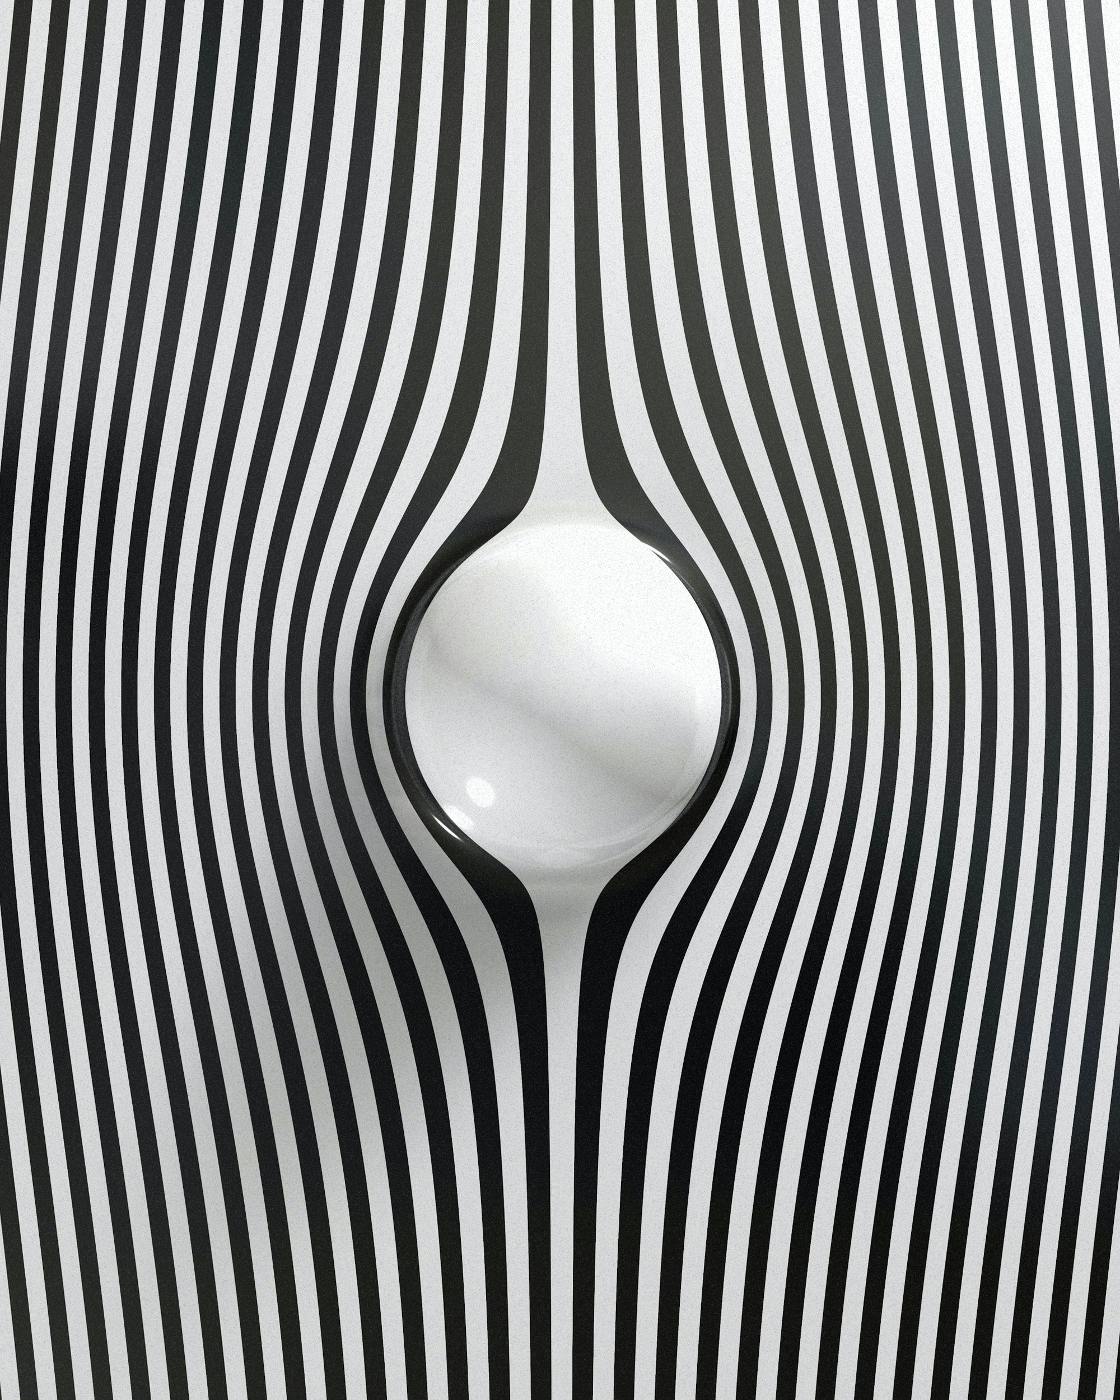 A black and white visual representation of the Doppler Effect